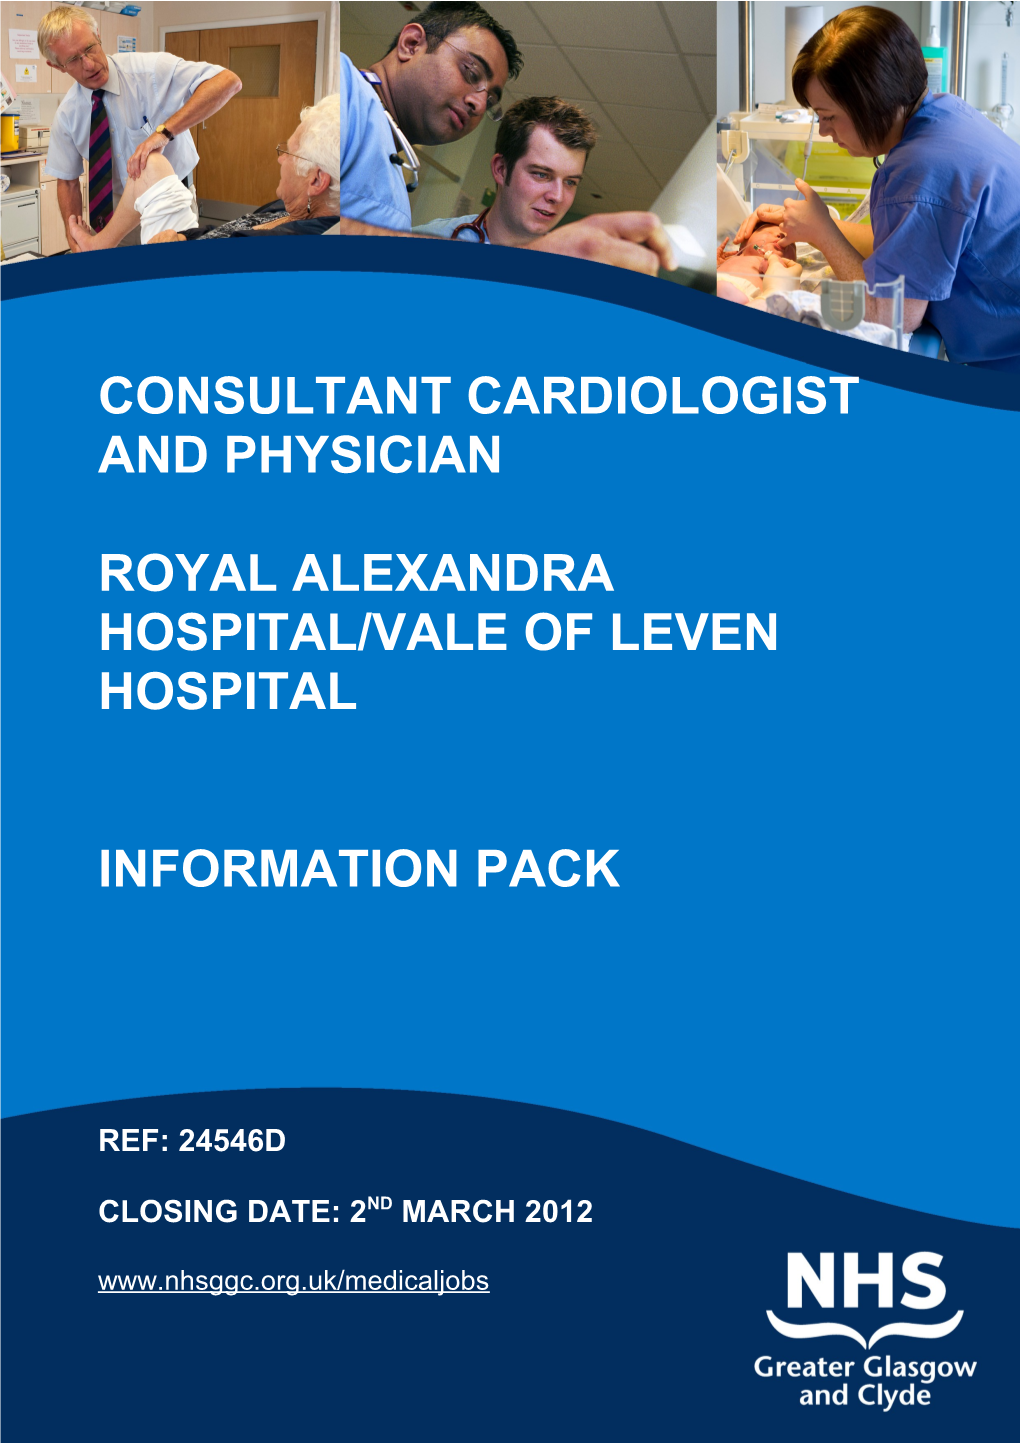 Consultant Cardiologist and Physician